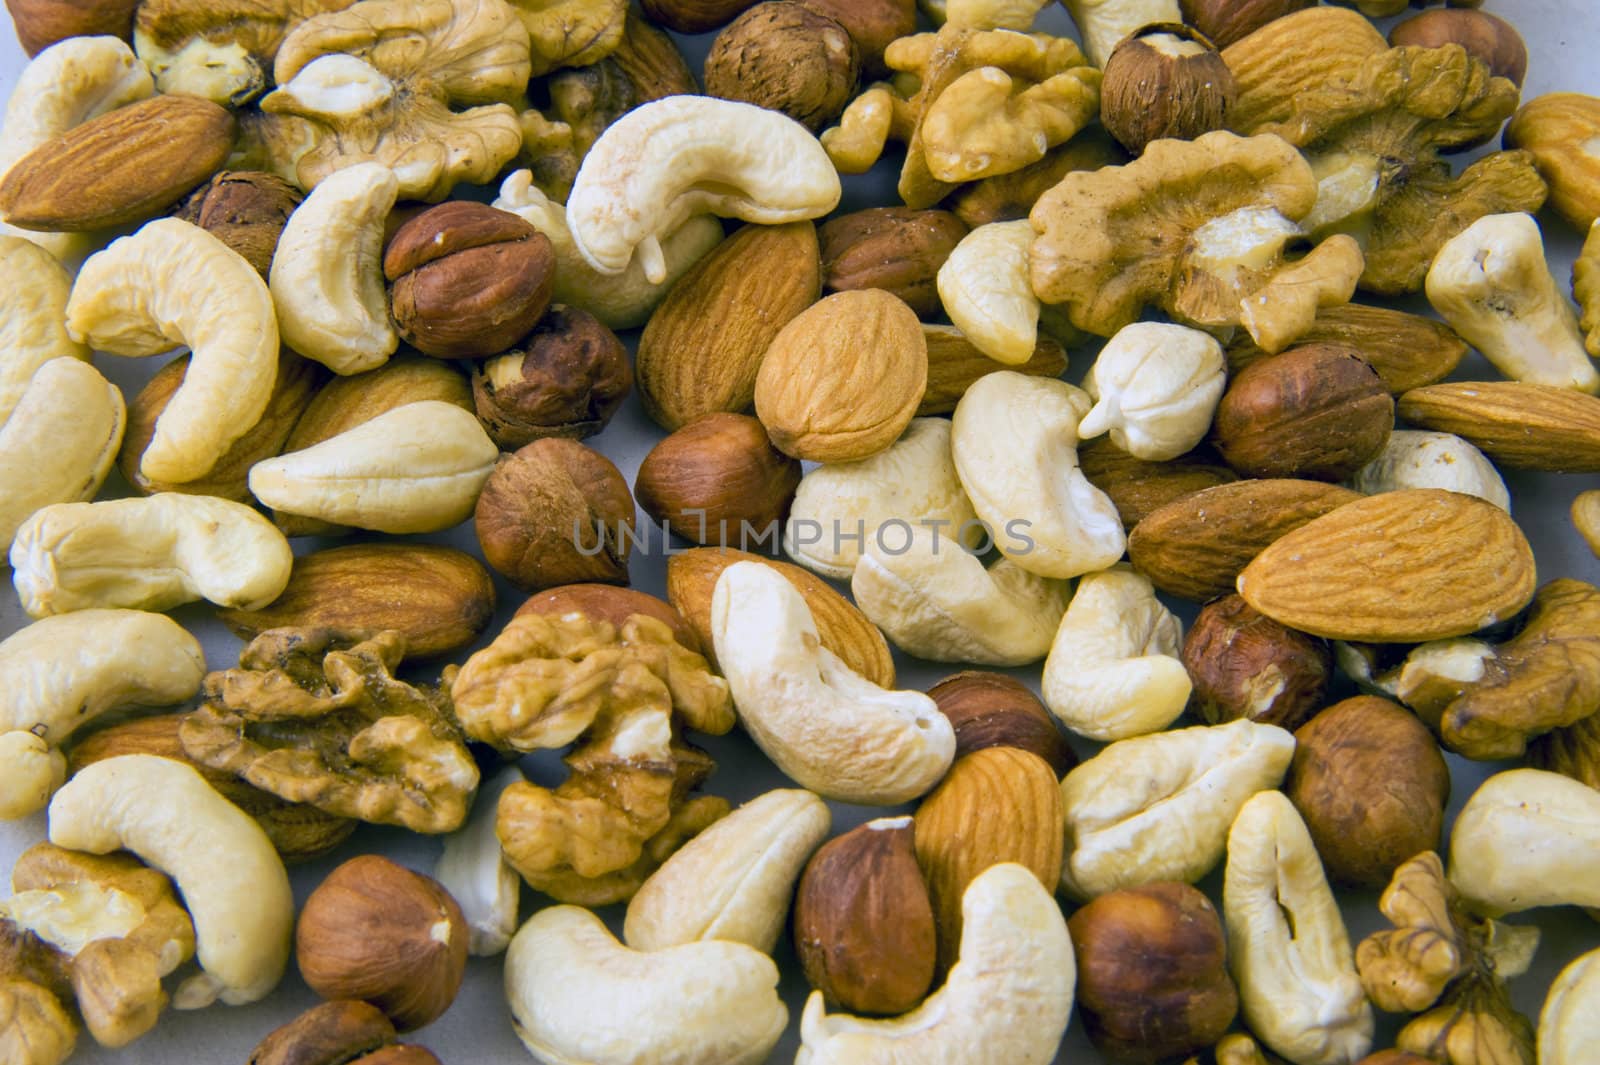 Snack and nuts taken as macro